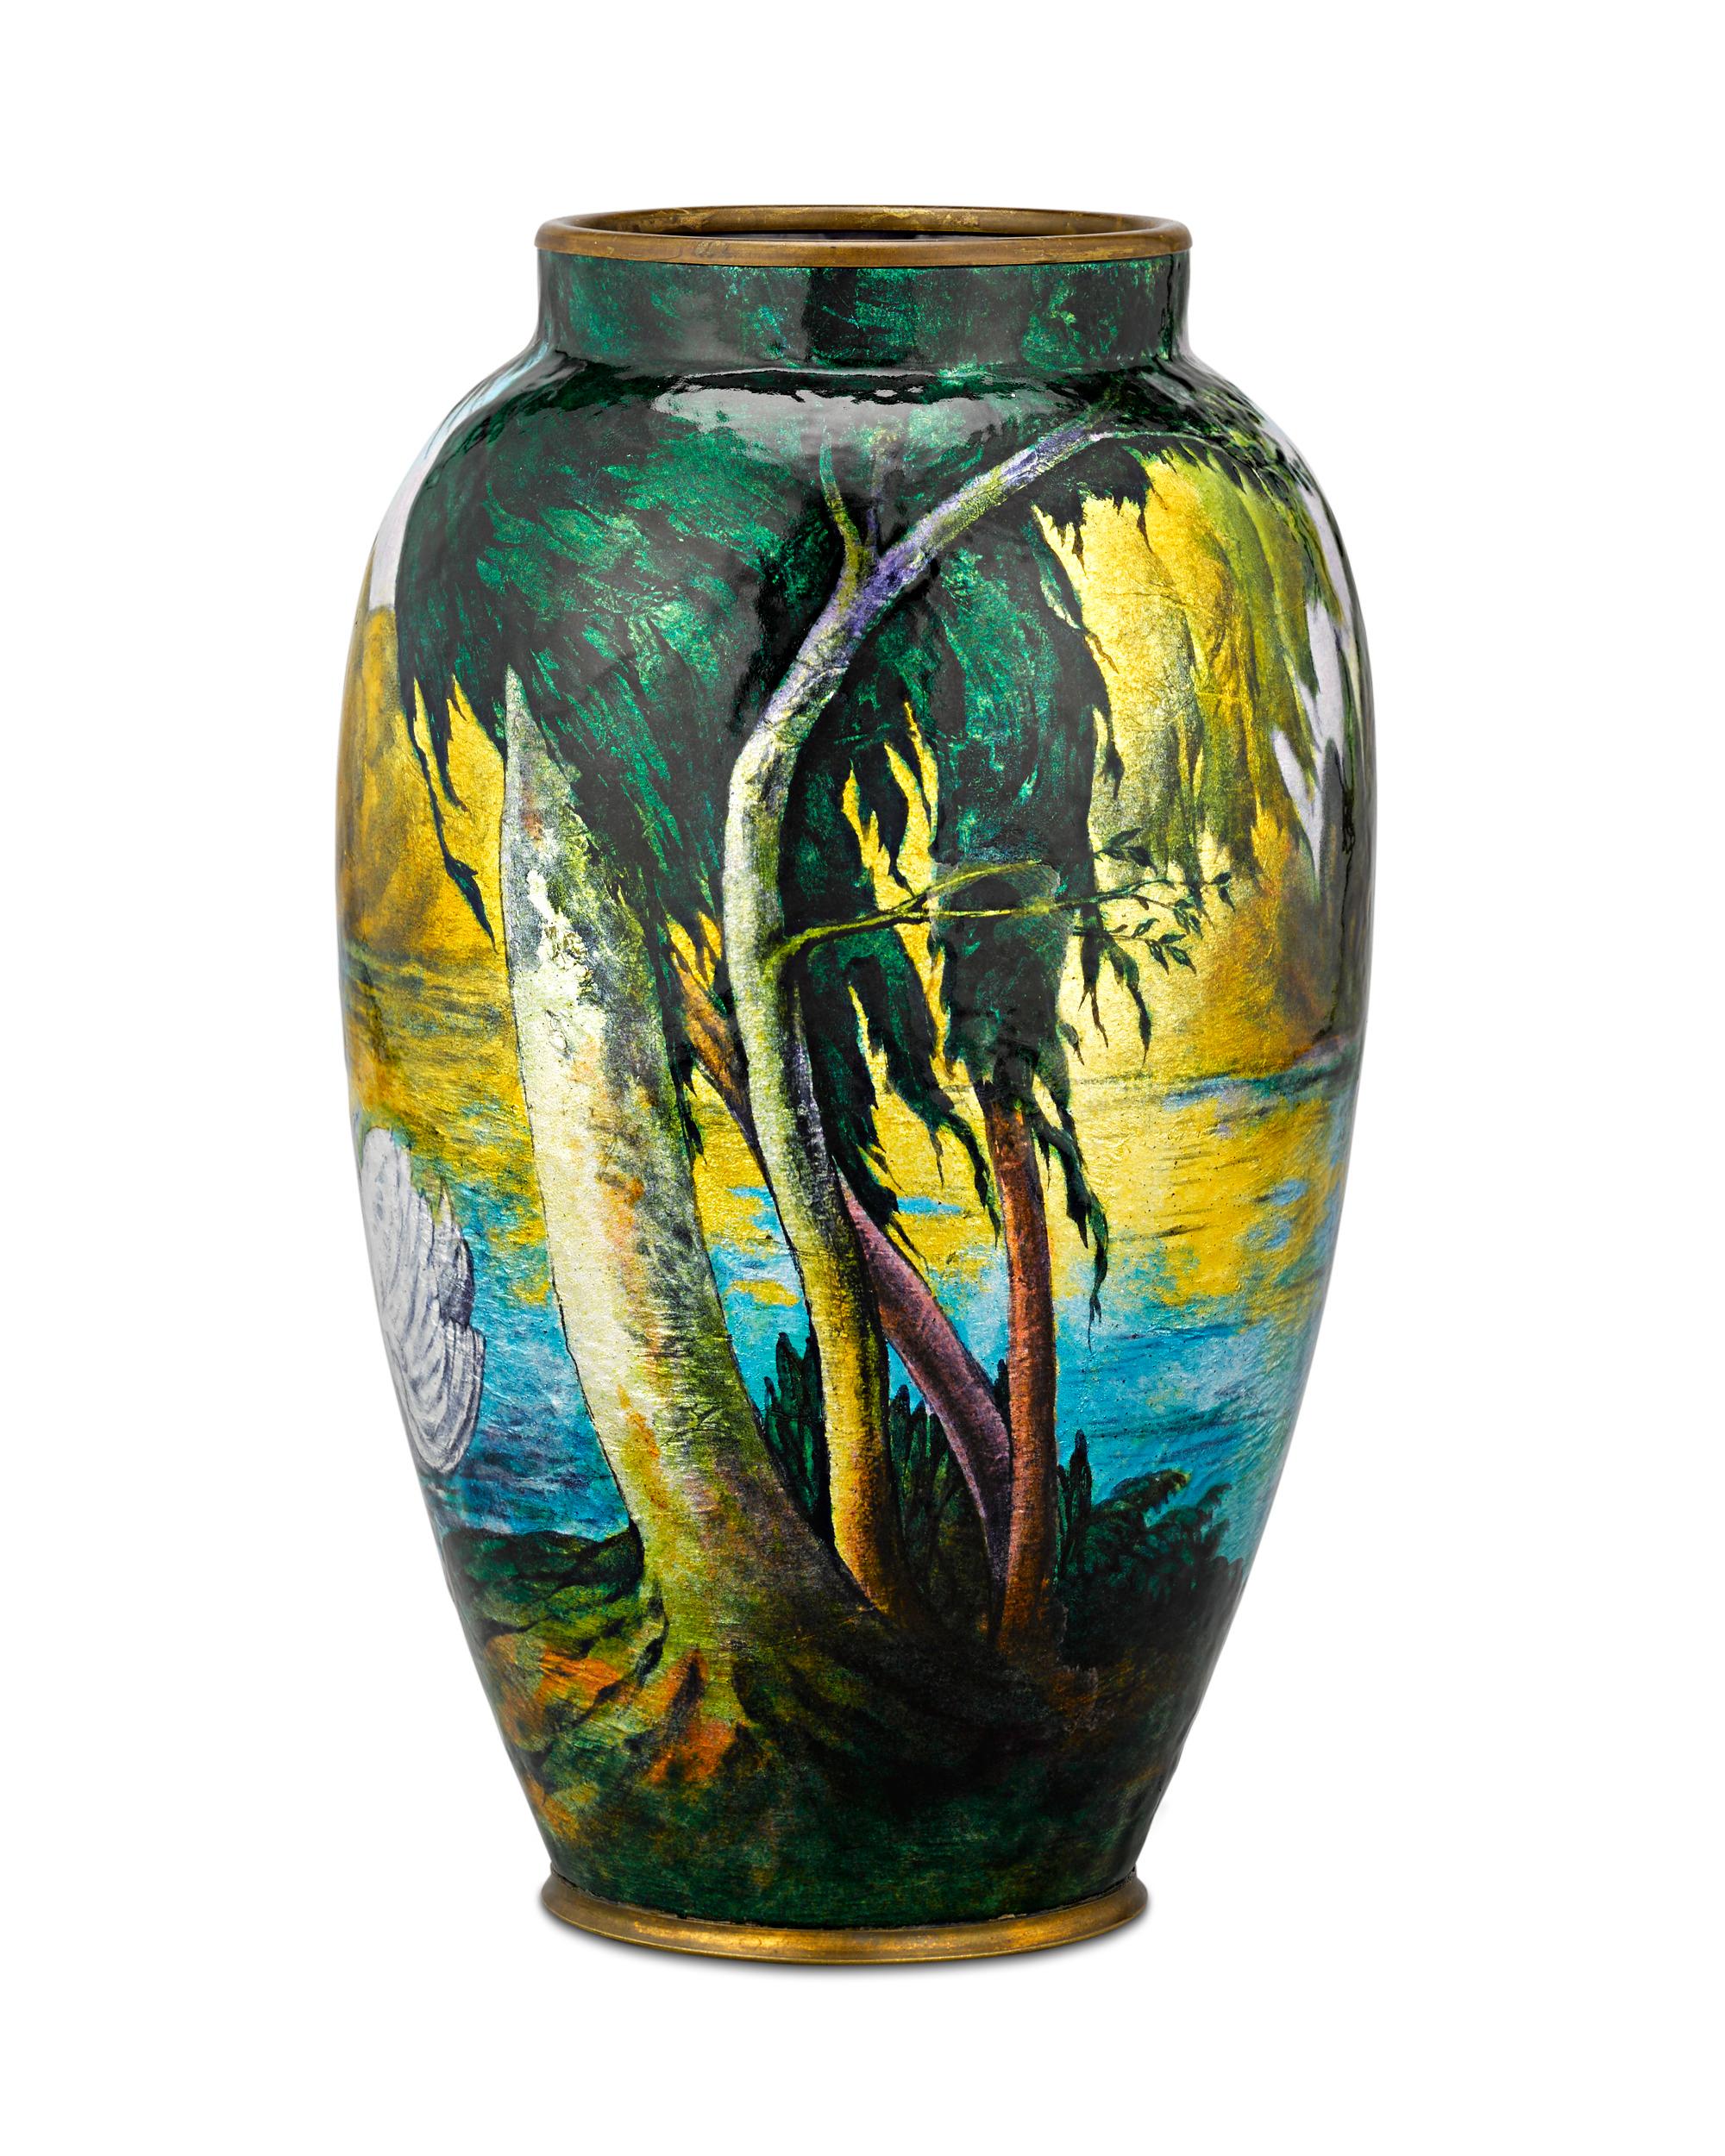 A pair of graceful swans adorn the form of this vibrant vase by the great Camille Fauré. The French enamel artist is best known for his highly sculptural creations that layer enamel atop a copper base form. The result is a luminosity and brilliance